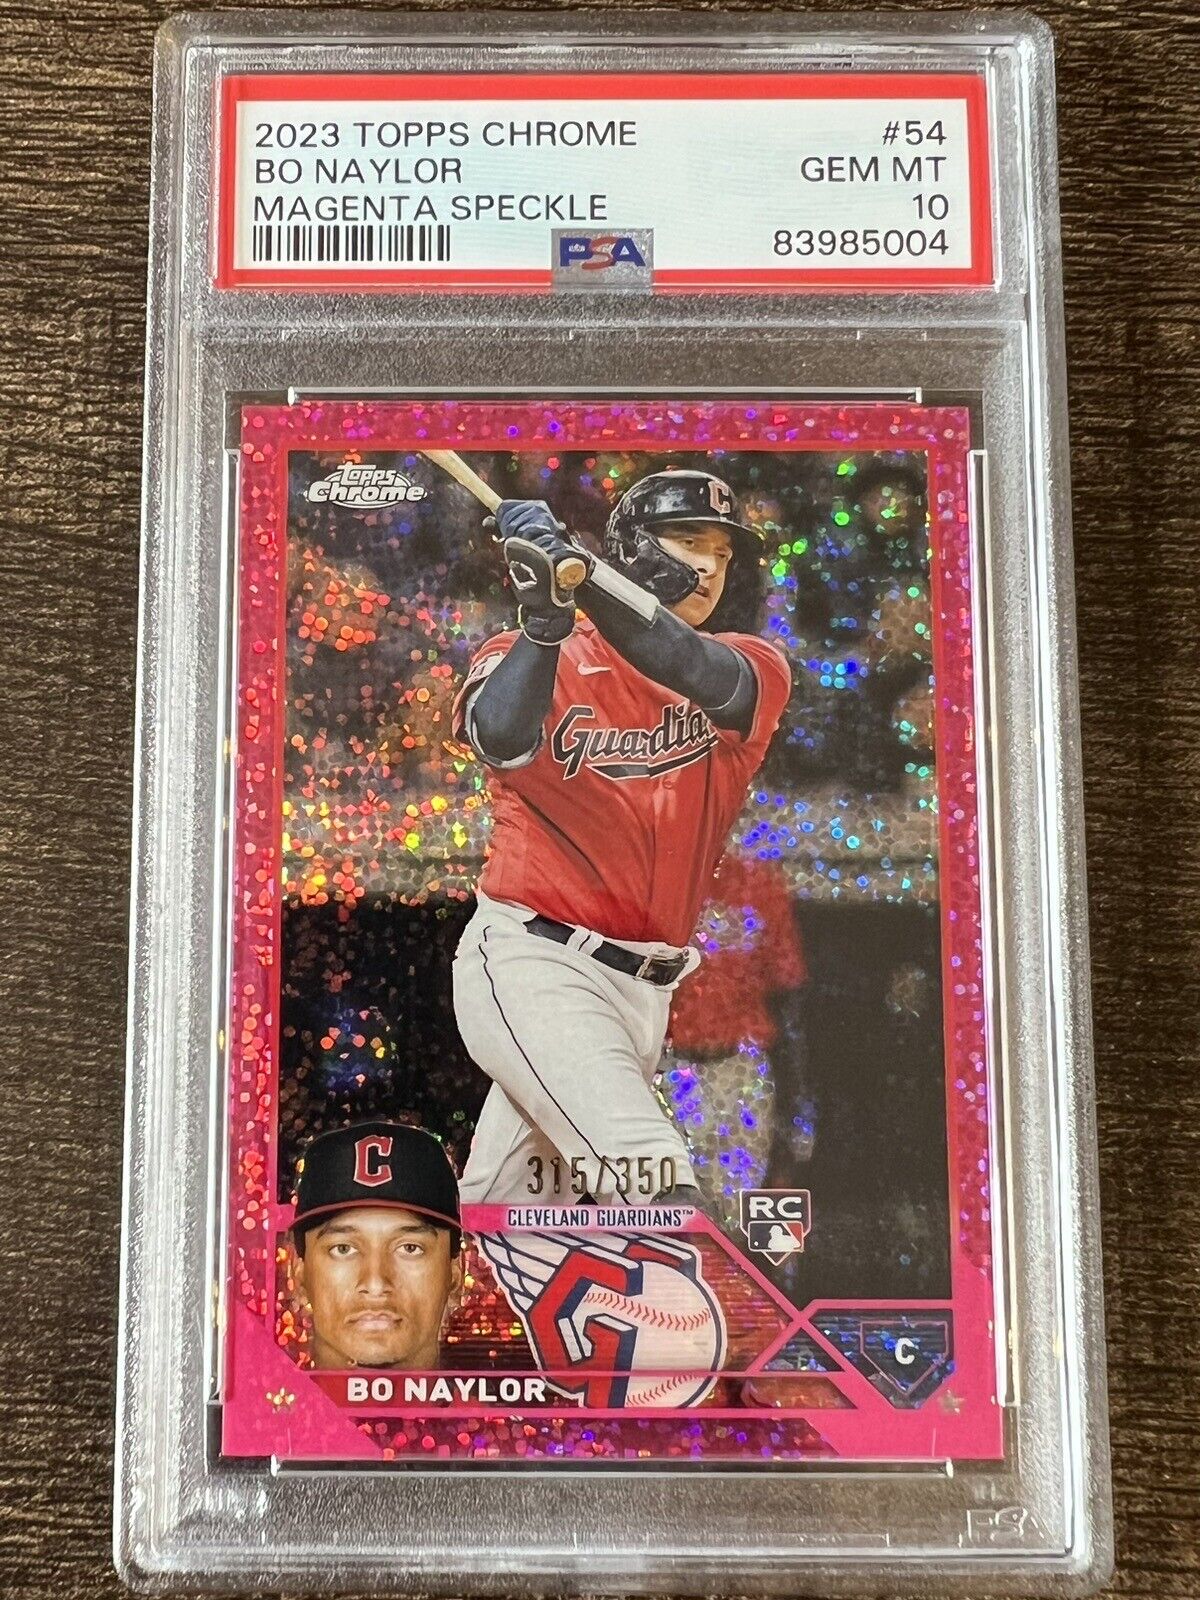 2023 Topps Chrome Bo Naylor Rookie RC Magenta Speckle /350 PSA 10 #54 Guardians